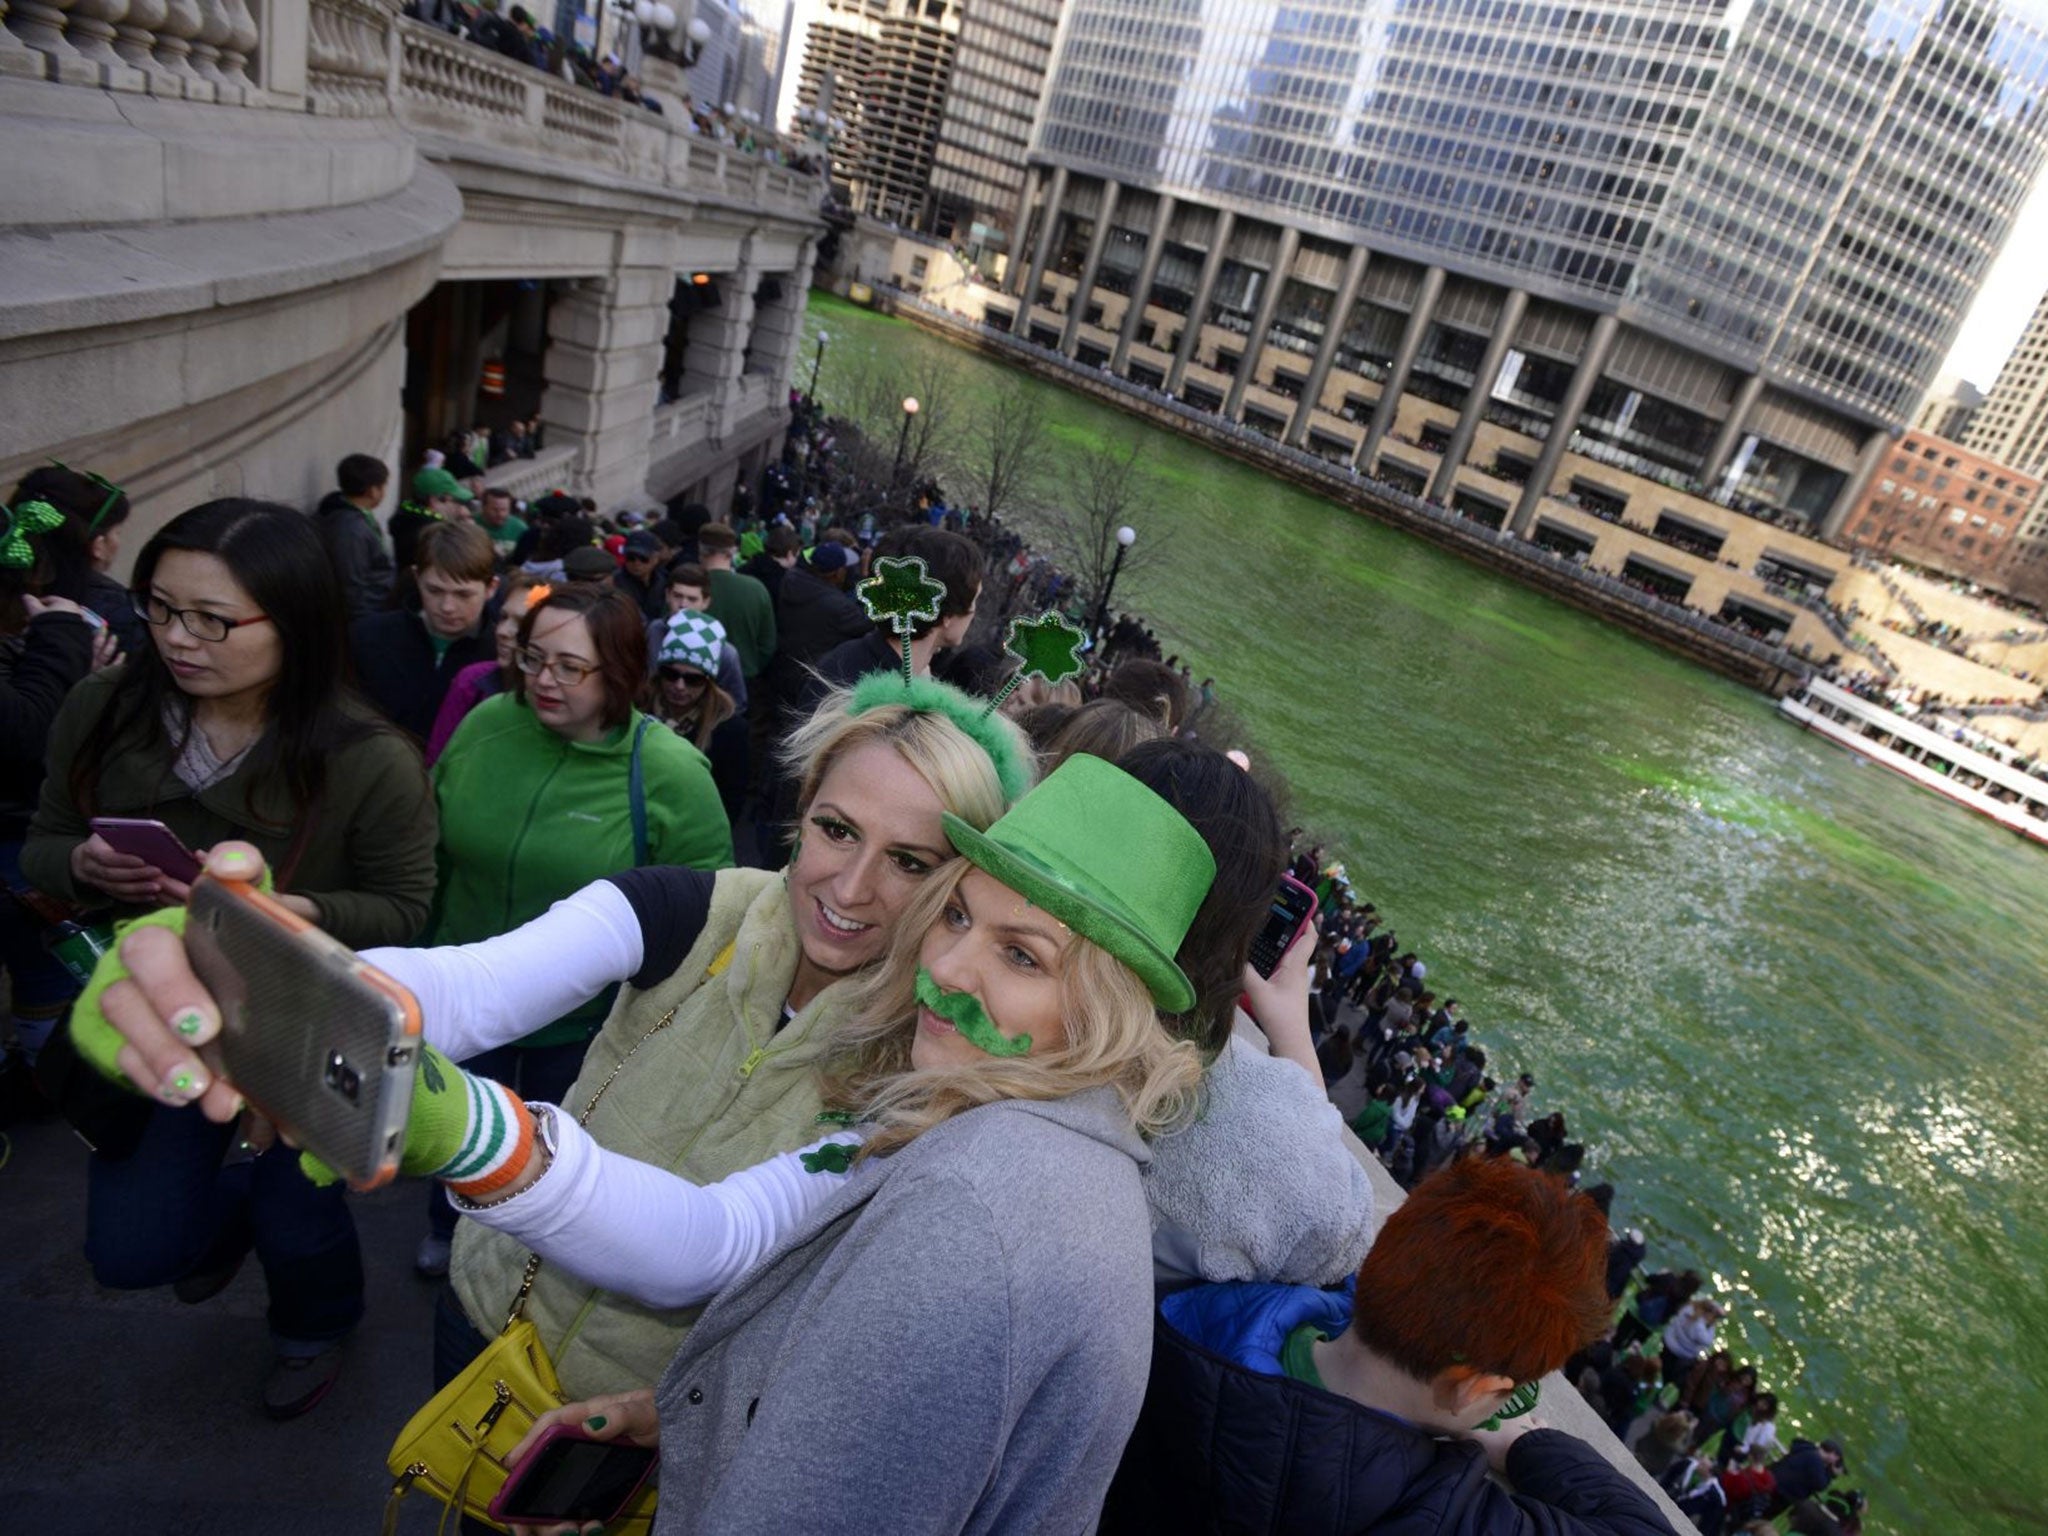 Alex Nowakowska left, and Joanna Puchlik right, both from Chicago, take a selfie after the Chicago River is dyed green for St. Patrick's Day.